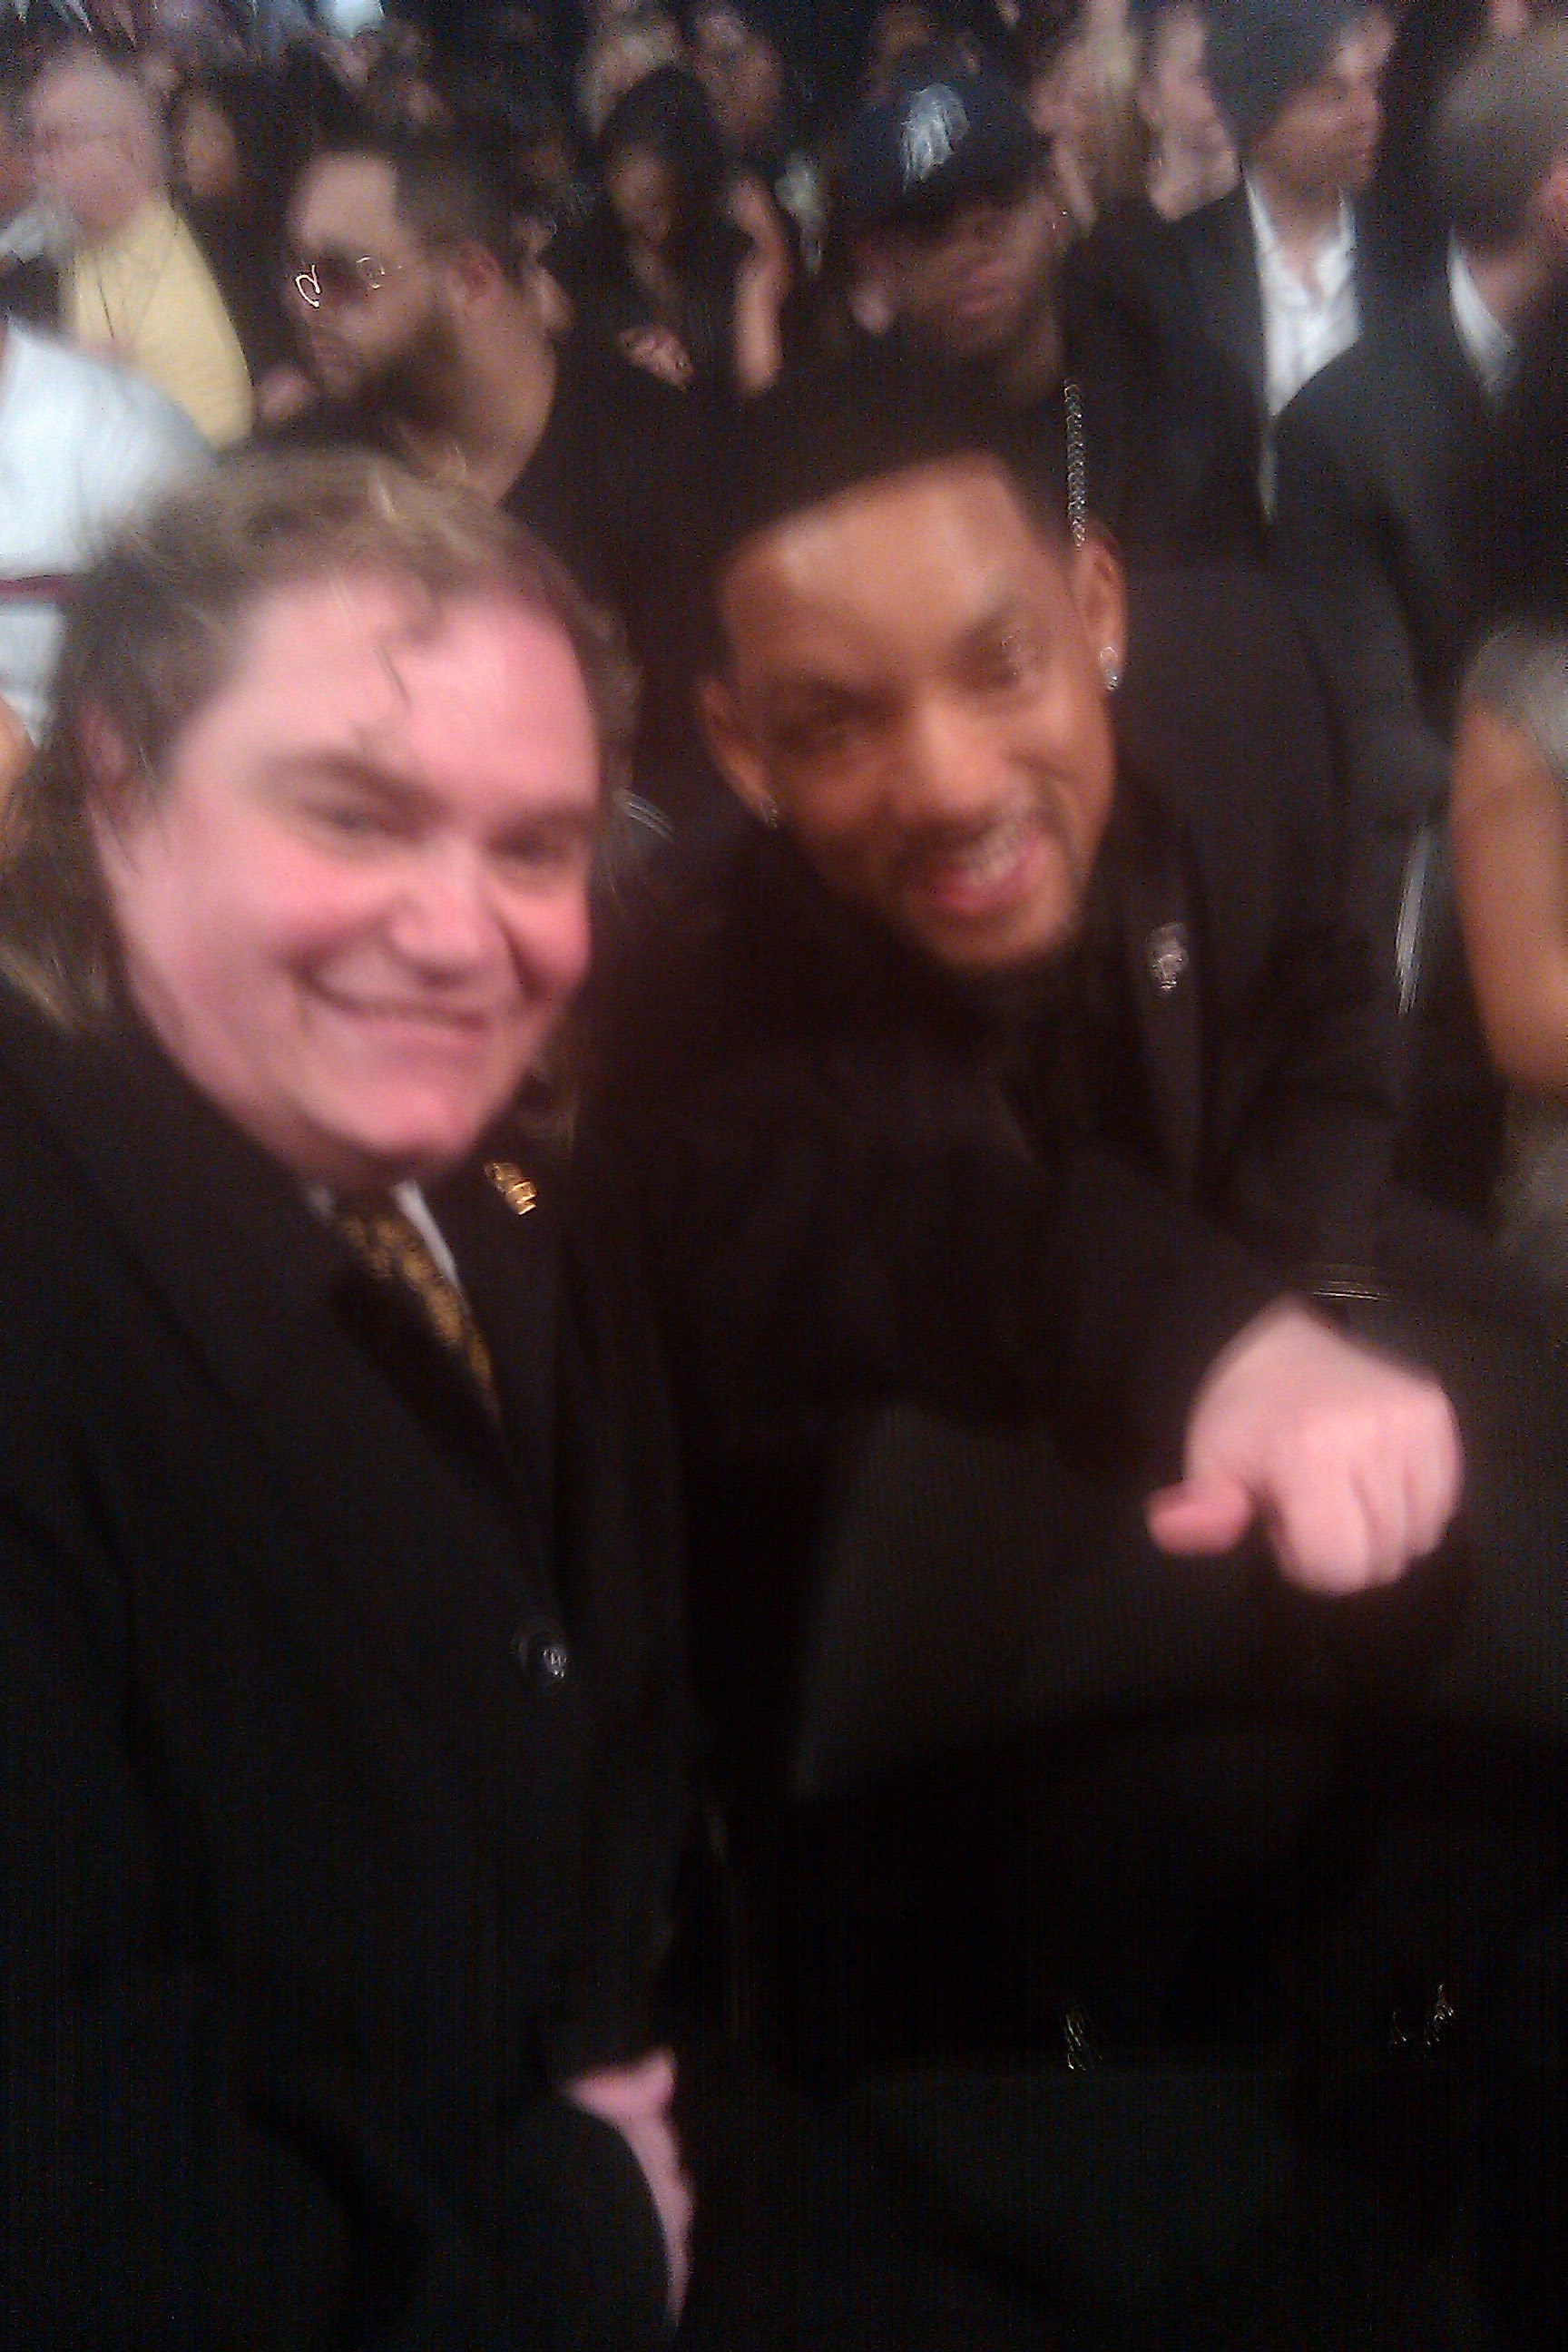 Pierre Patrick and Will Smith Grammys 2011